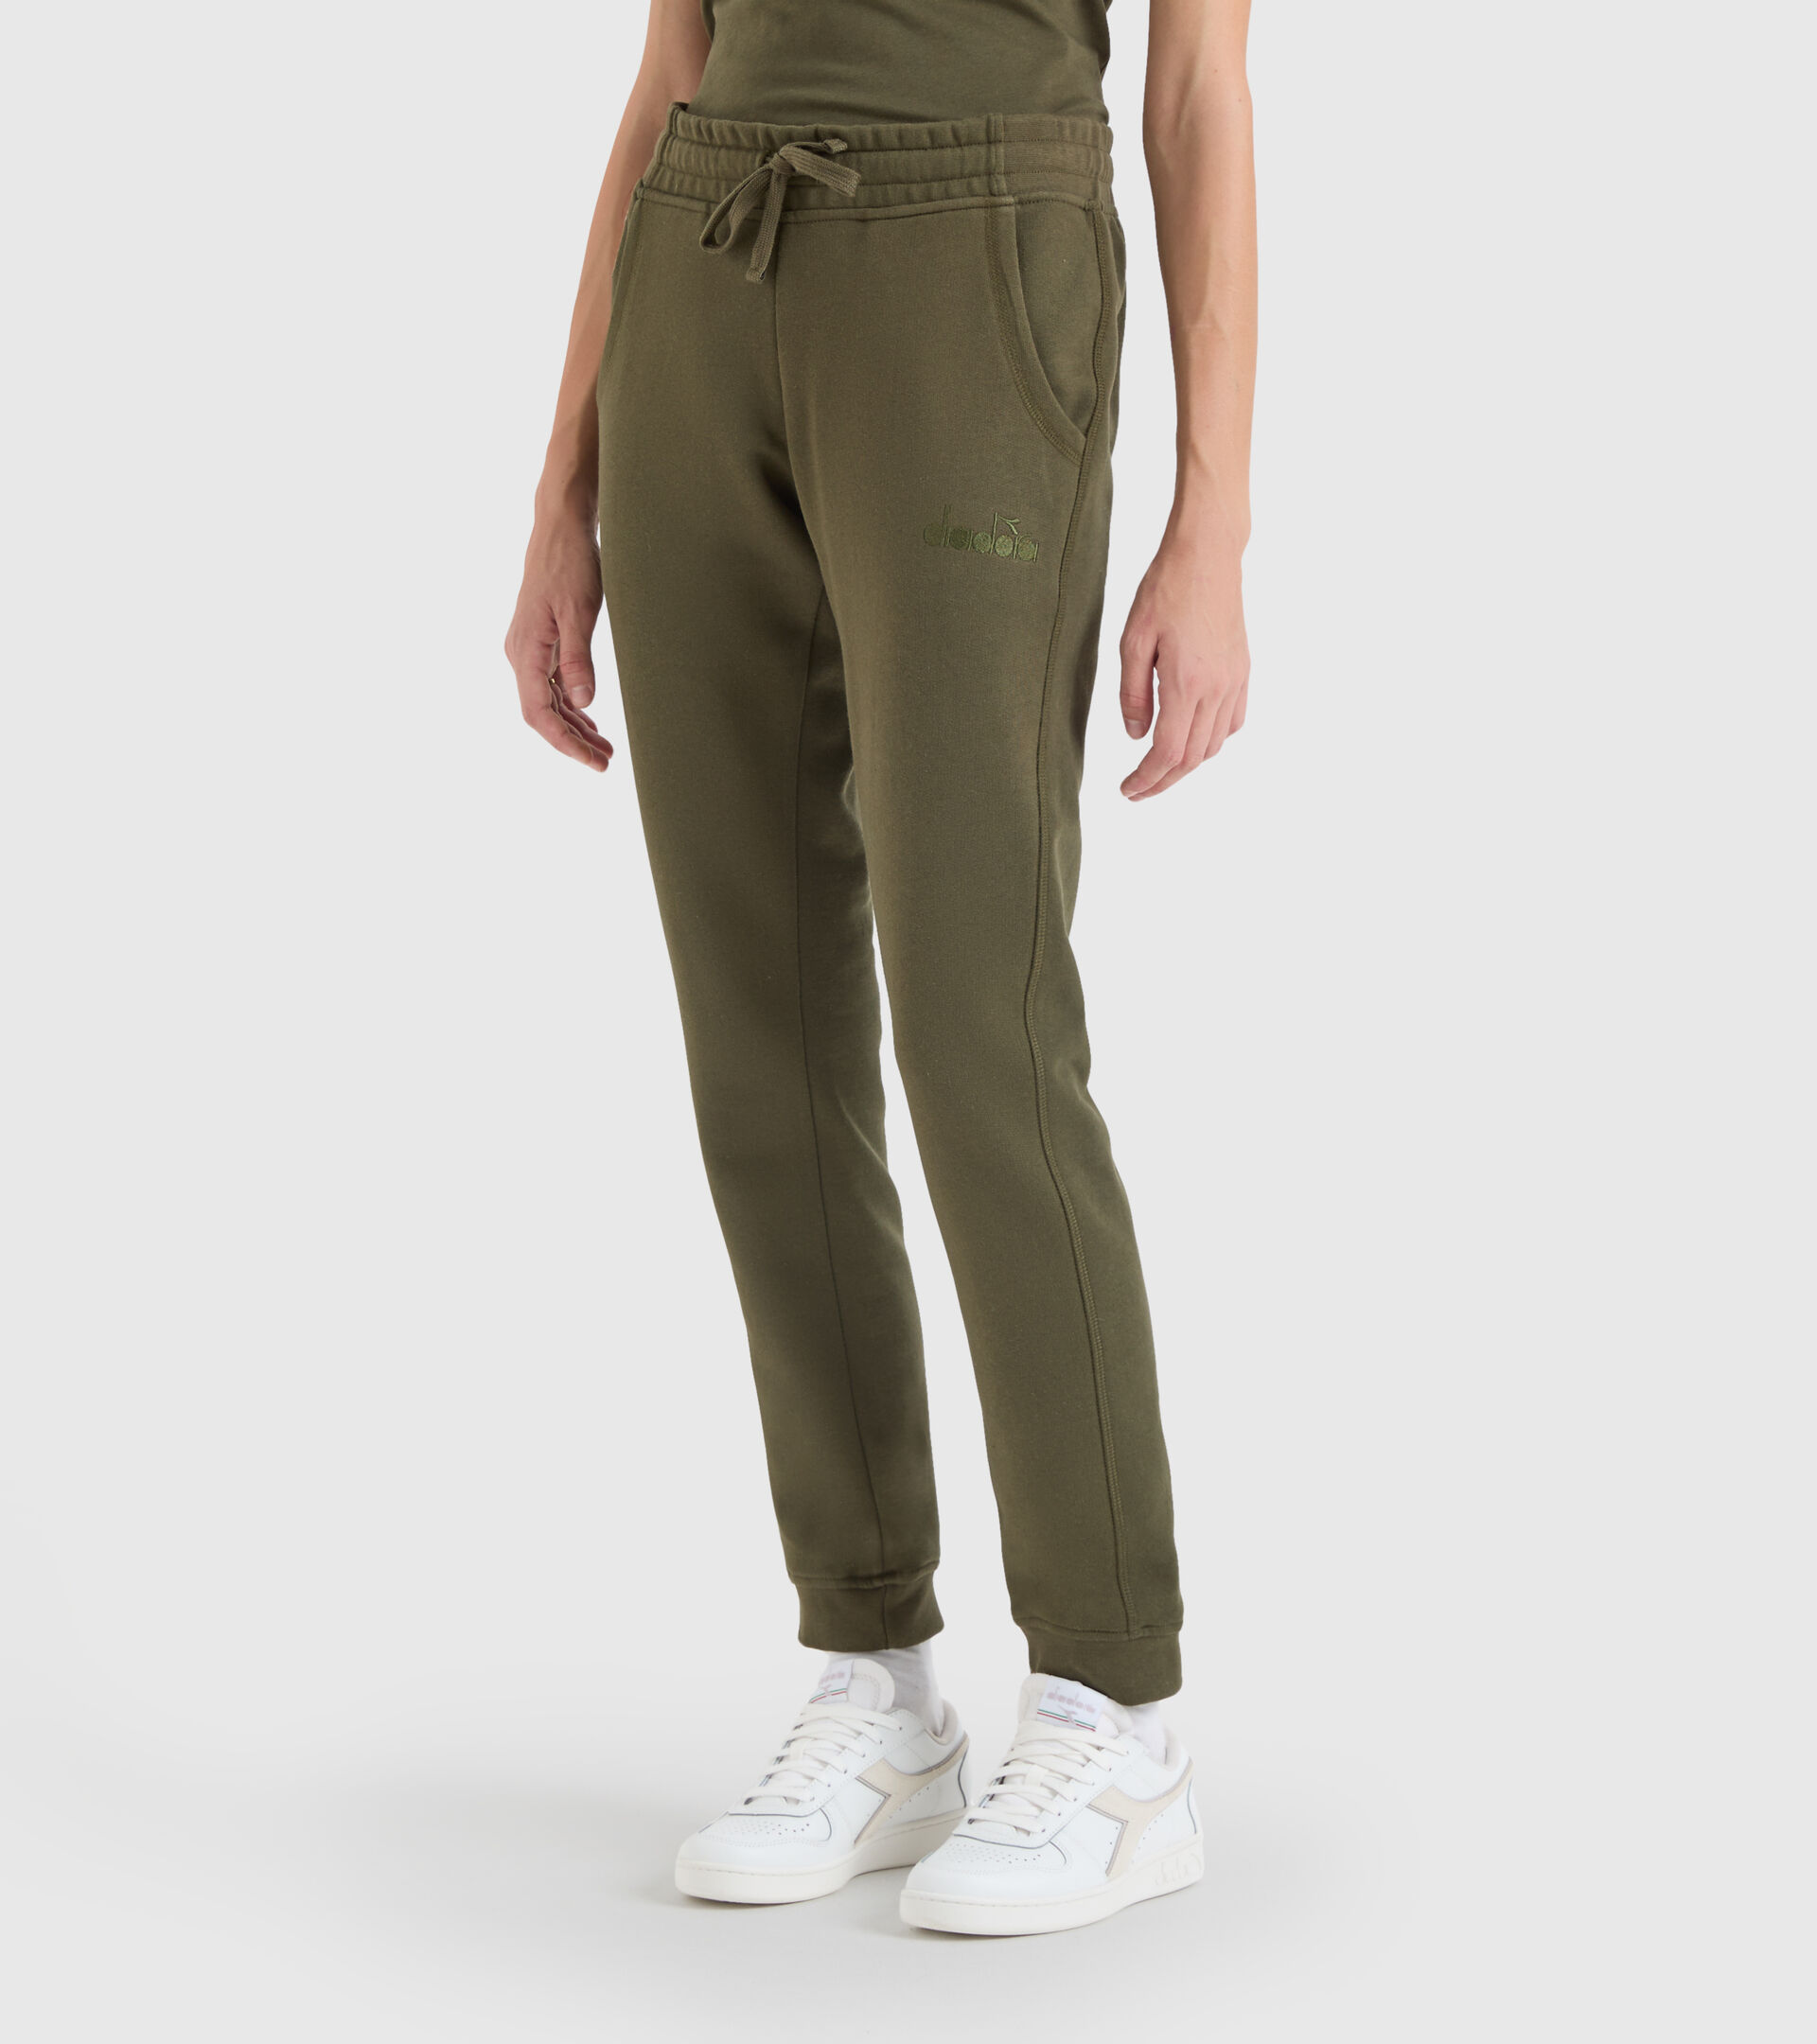 Cotton sports trousers - Made in Italy - Women L. JOGGER PANT MII GREEN MILITARY - Diadora